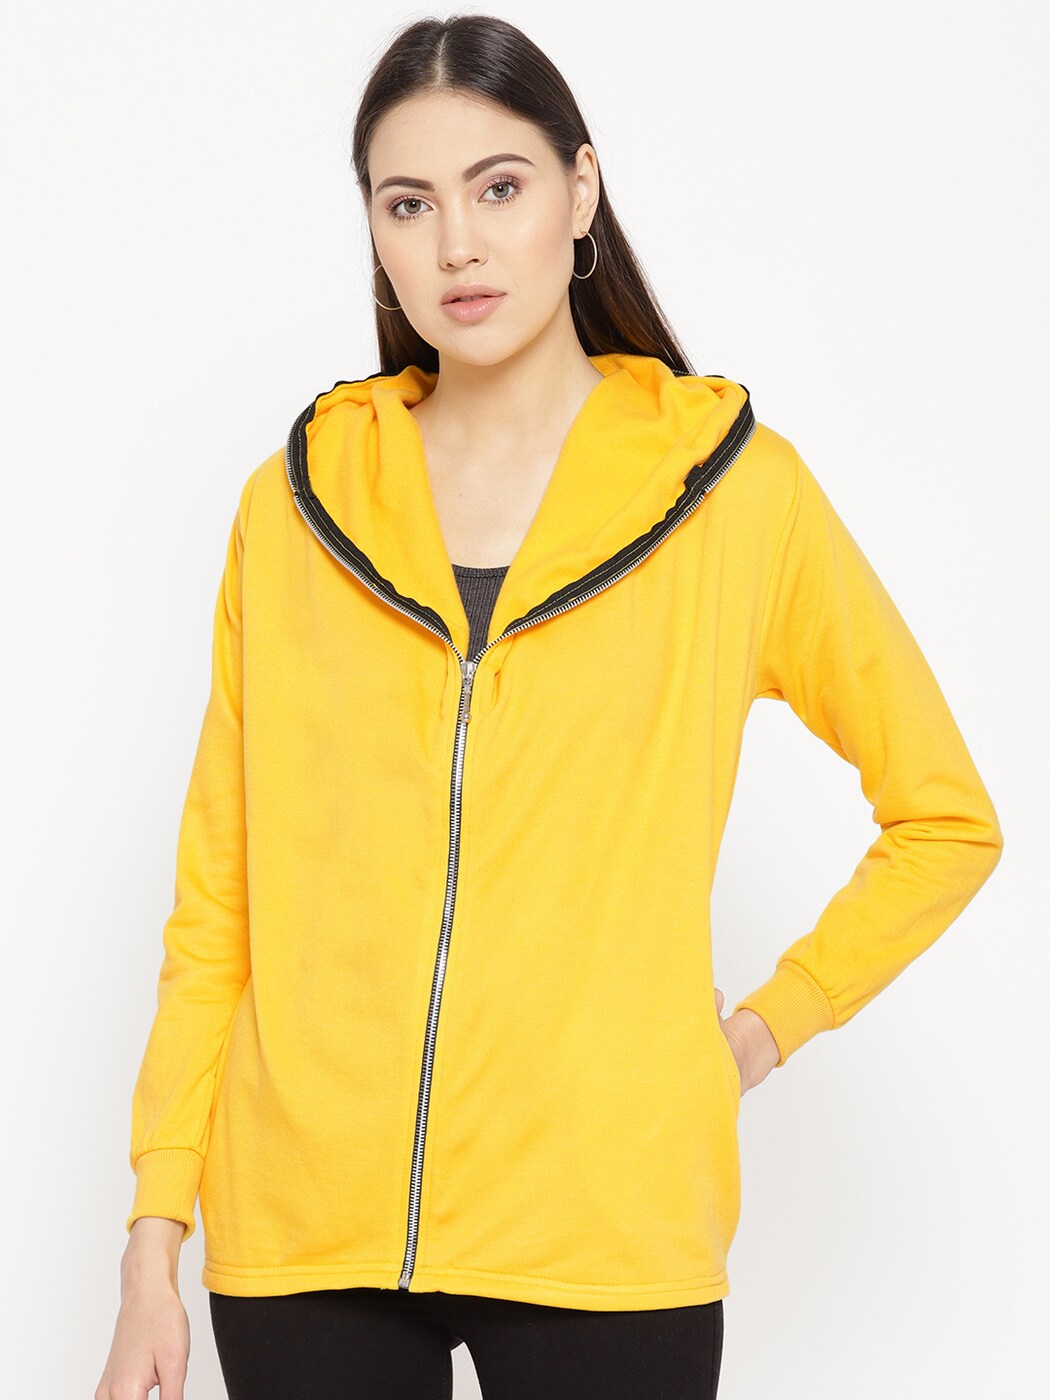 solid yellow hoodie